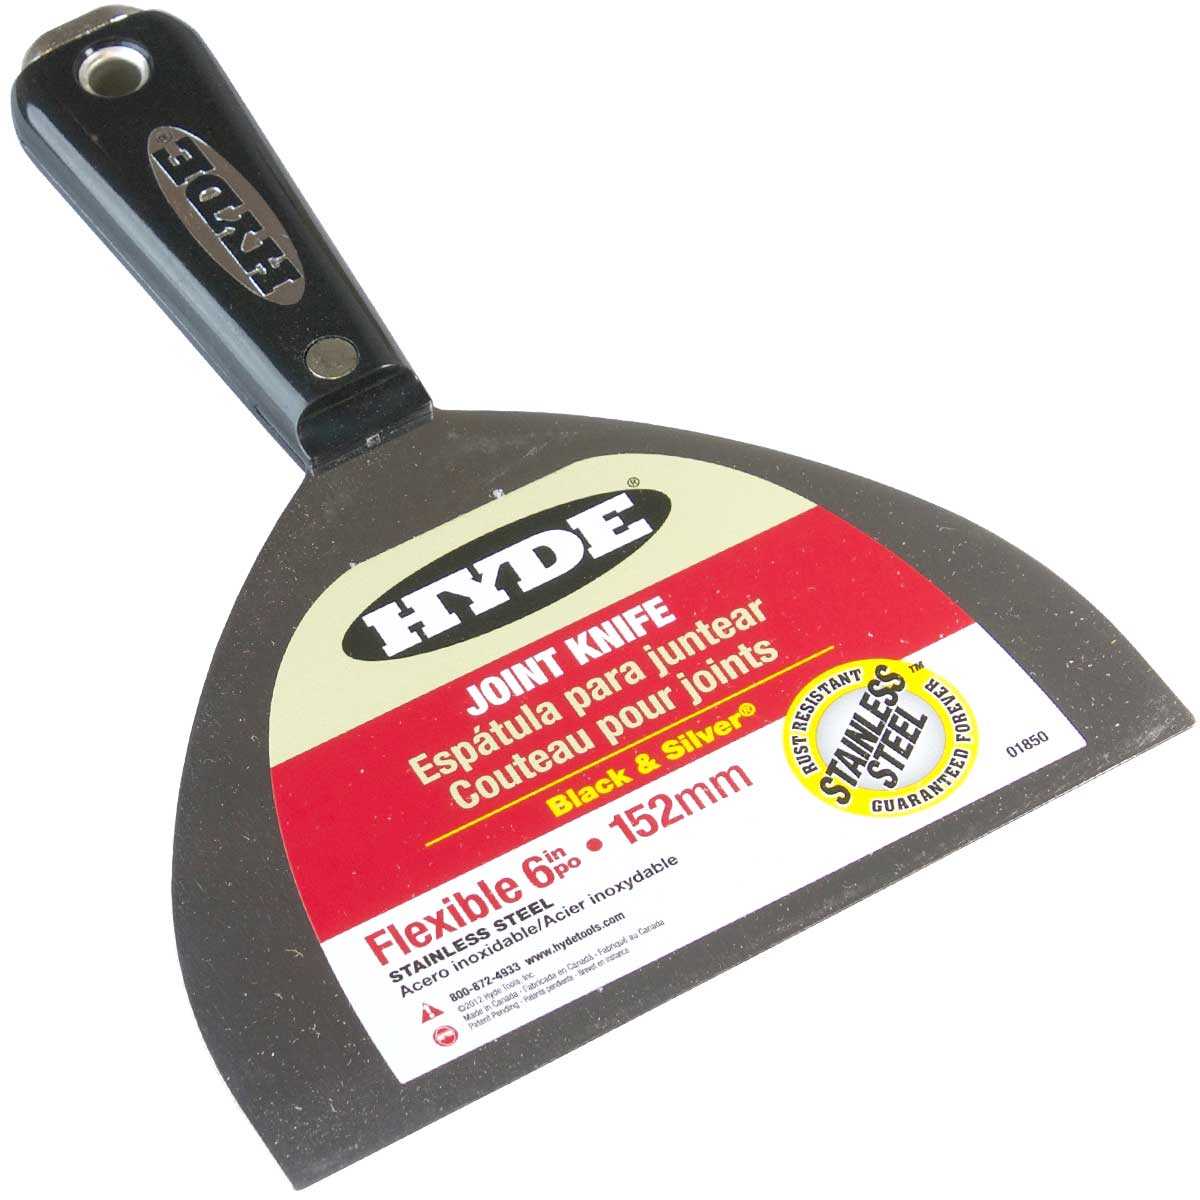 HYDE 01850 6" Joint Knife